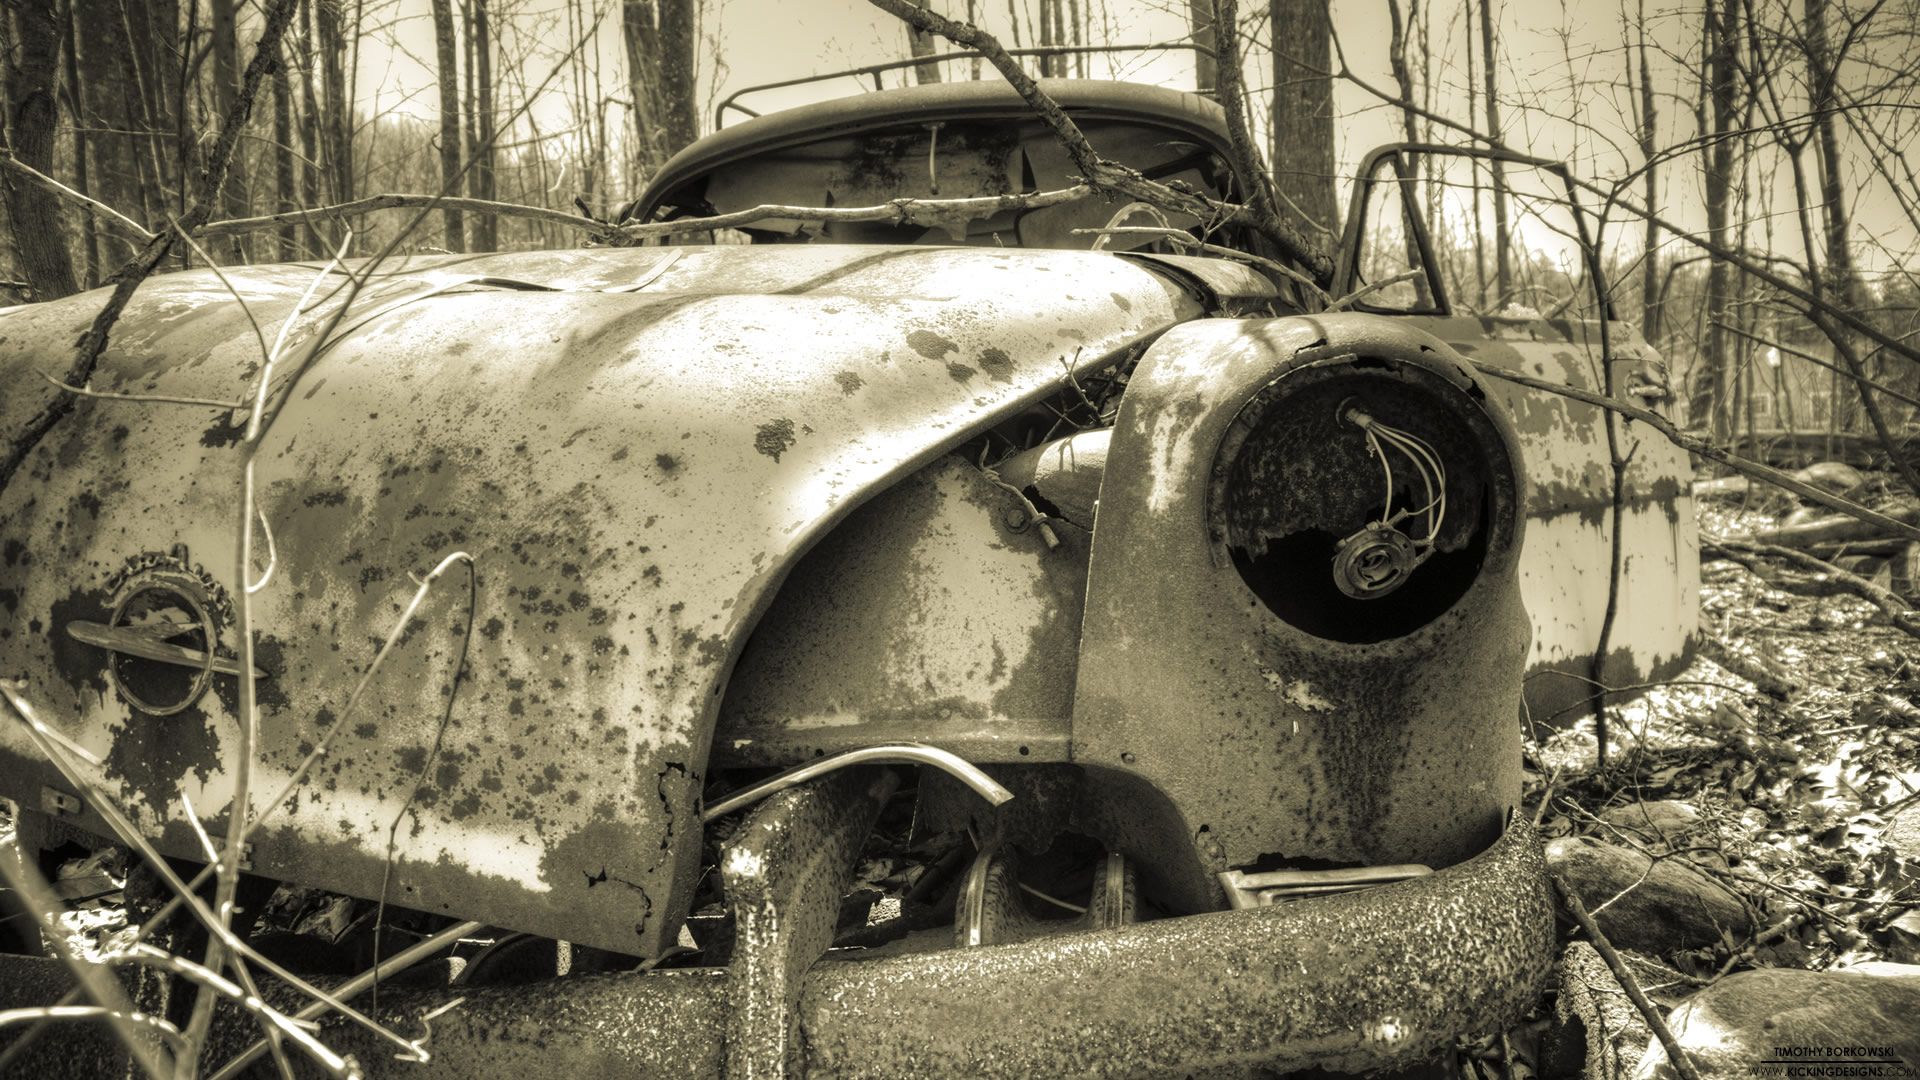 7 Old Car HD Wallpapers | Backgrounds - Wallpaper Abyss